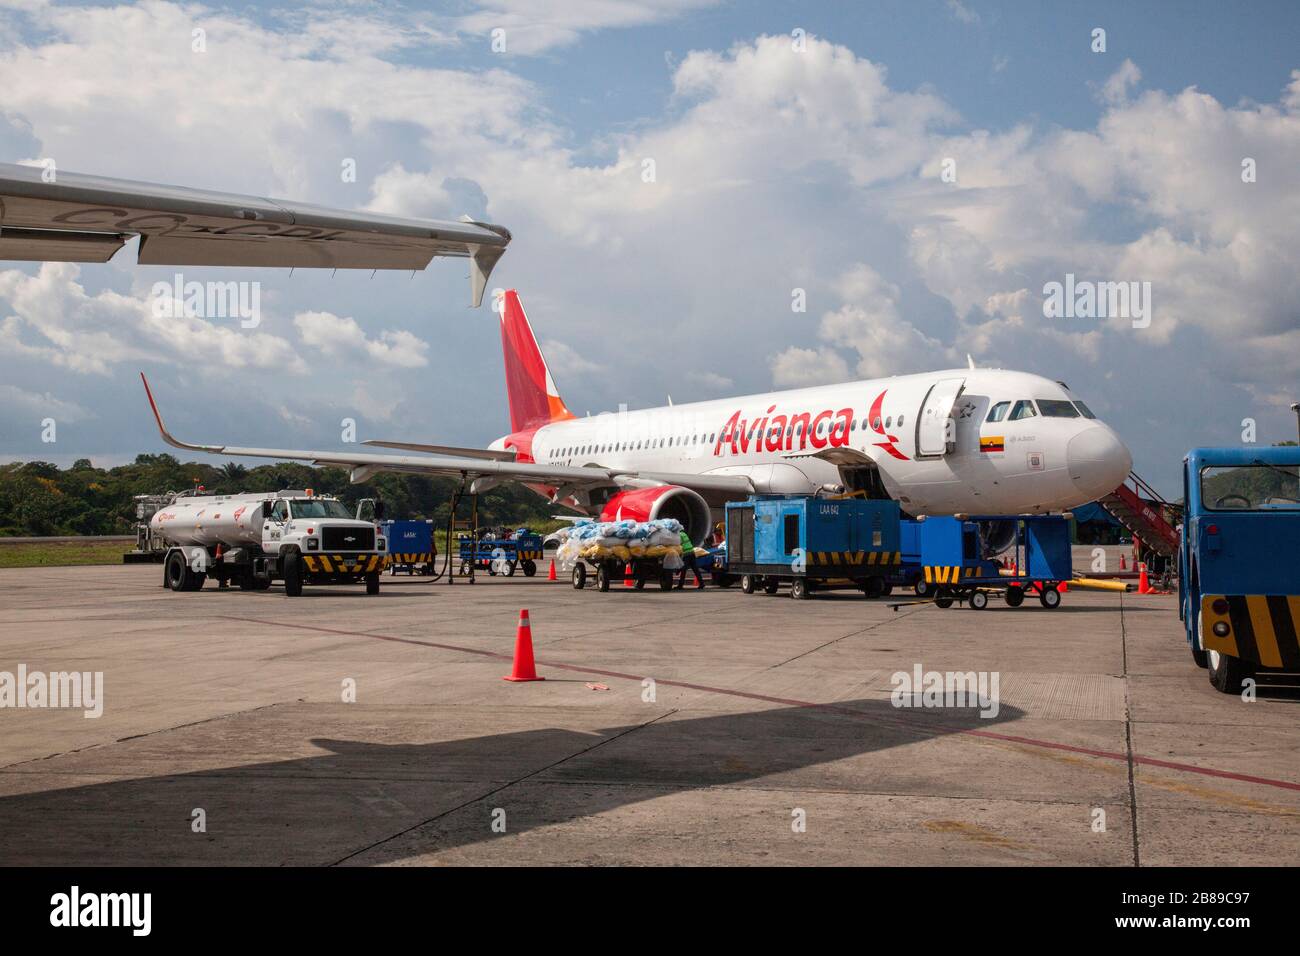 Avianca Airbus plane, Colombia national airline, at Leticia airport, Amazon, Colombia, South America. Stock Photo